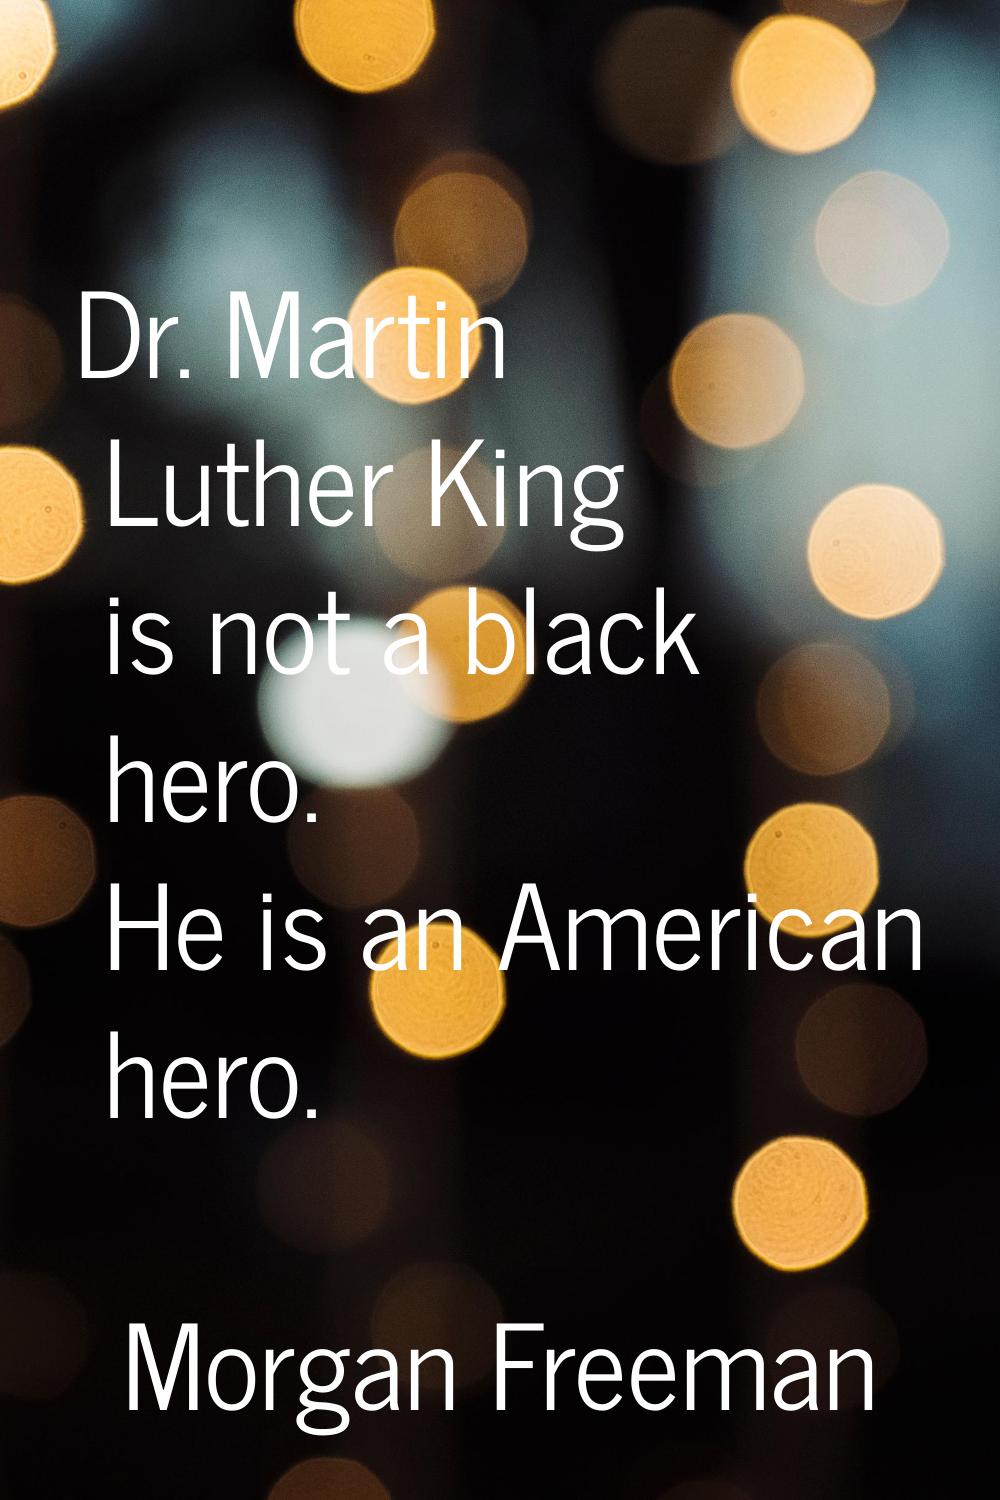 Dr. Martin Luther King is not a black hero. He is an American hero.